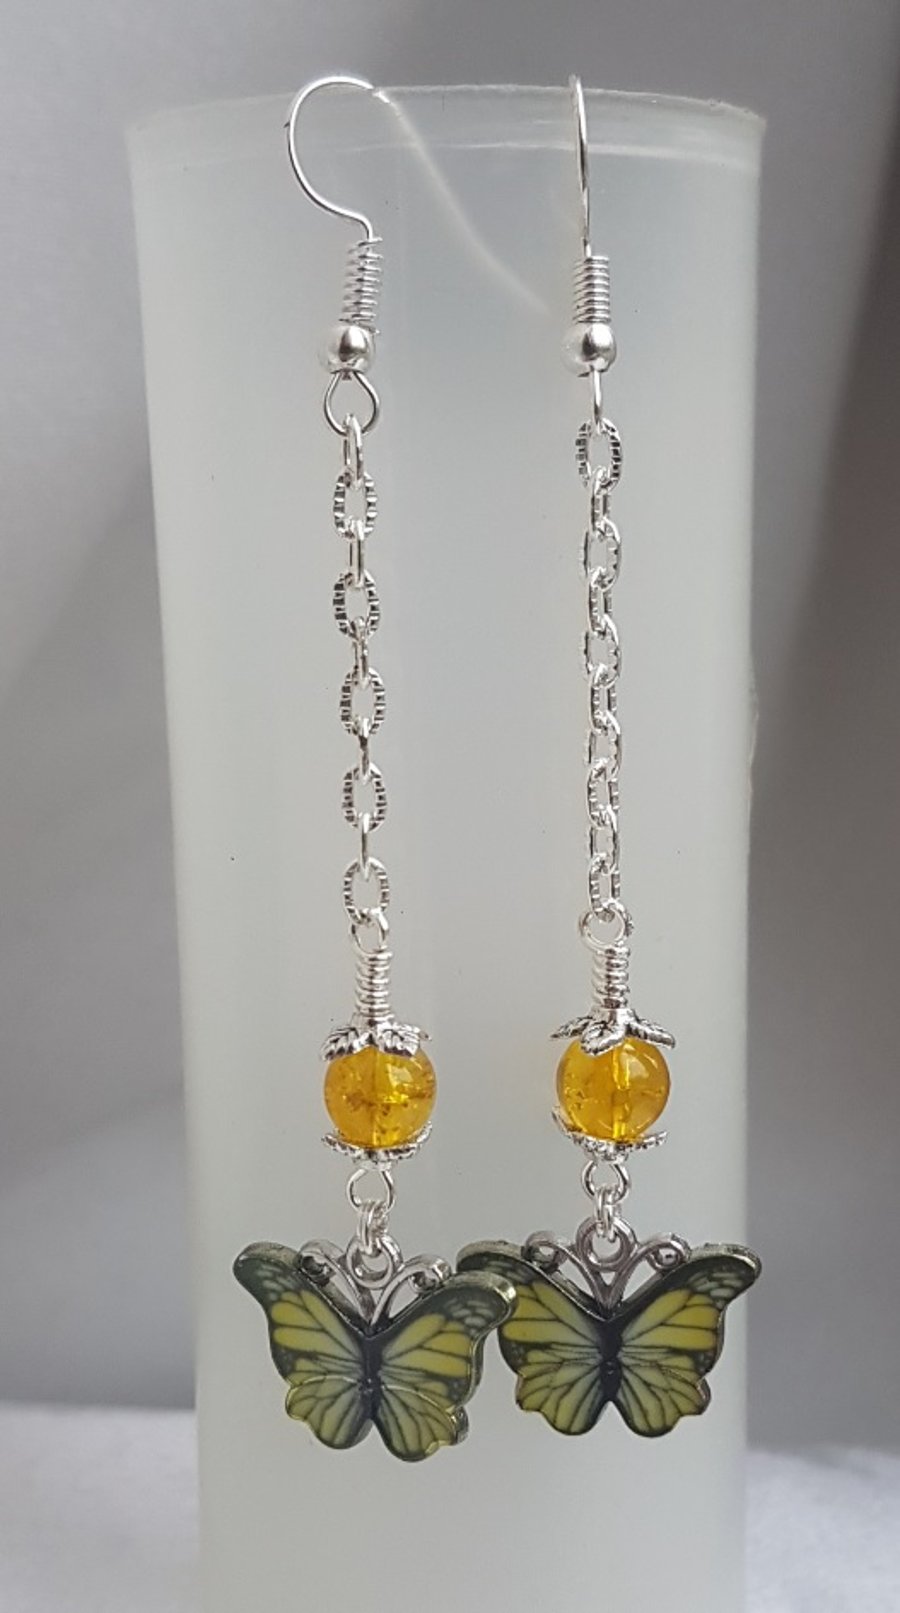 Gorgeous Dangly Yellow Butterfly Earrings - Silver Tones.